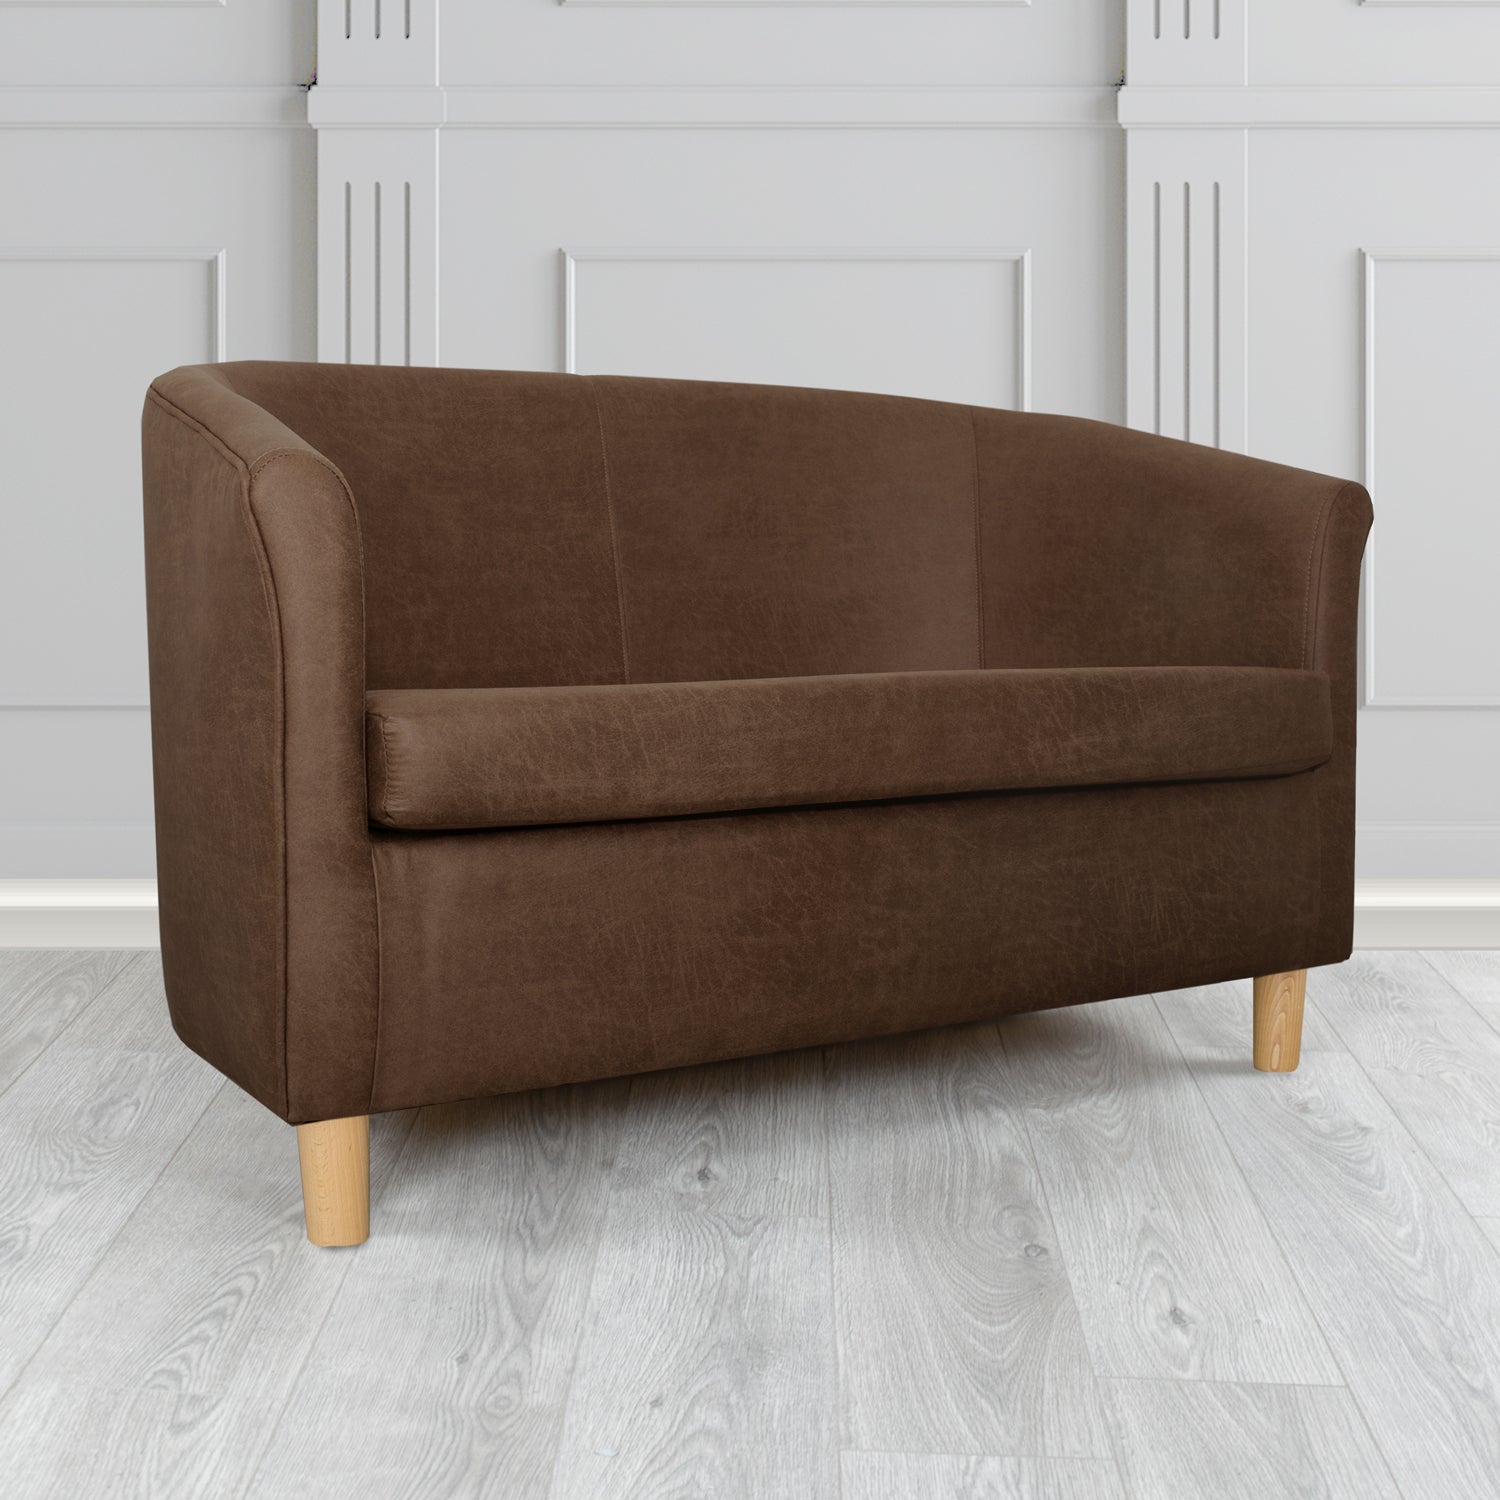 Tuscany 2 Seater Tub Sofa in Nevada Chocolate Faux Leather - The Tub Chair Shop